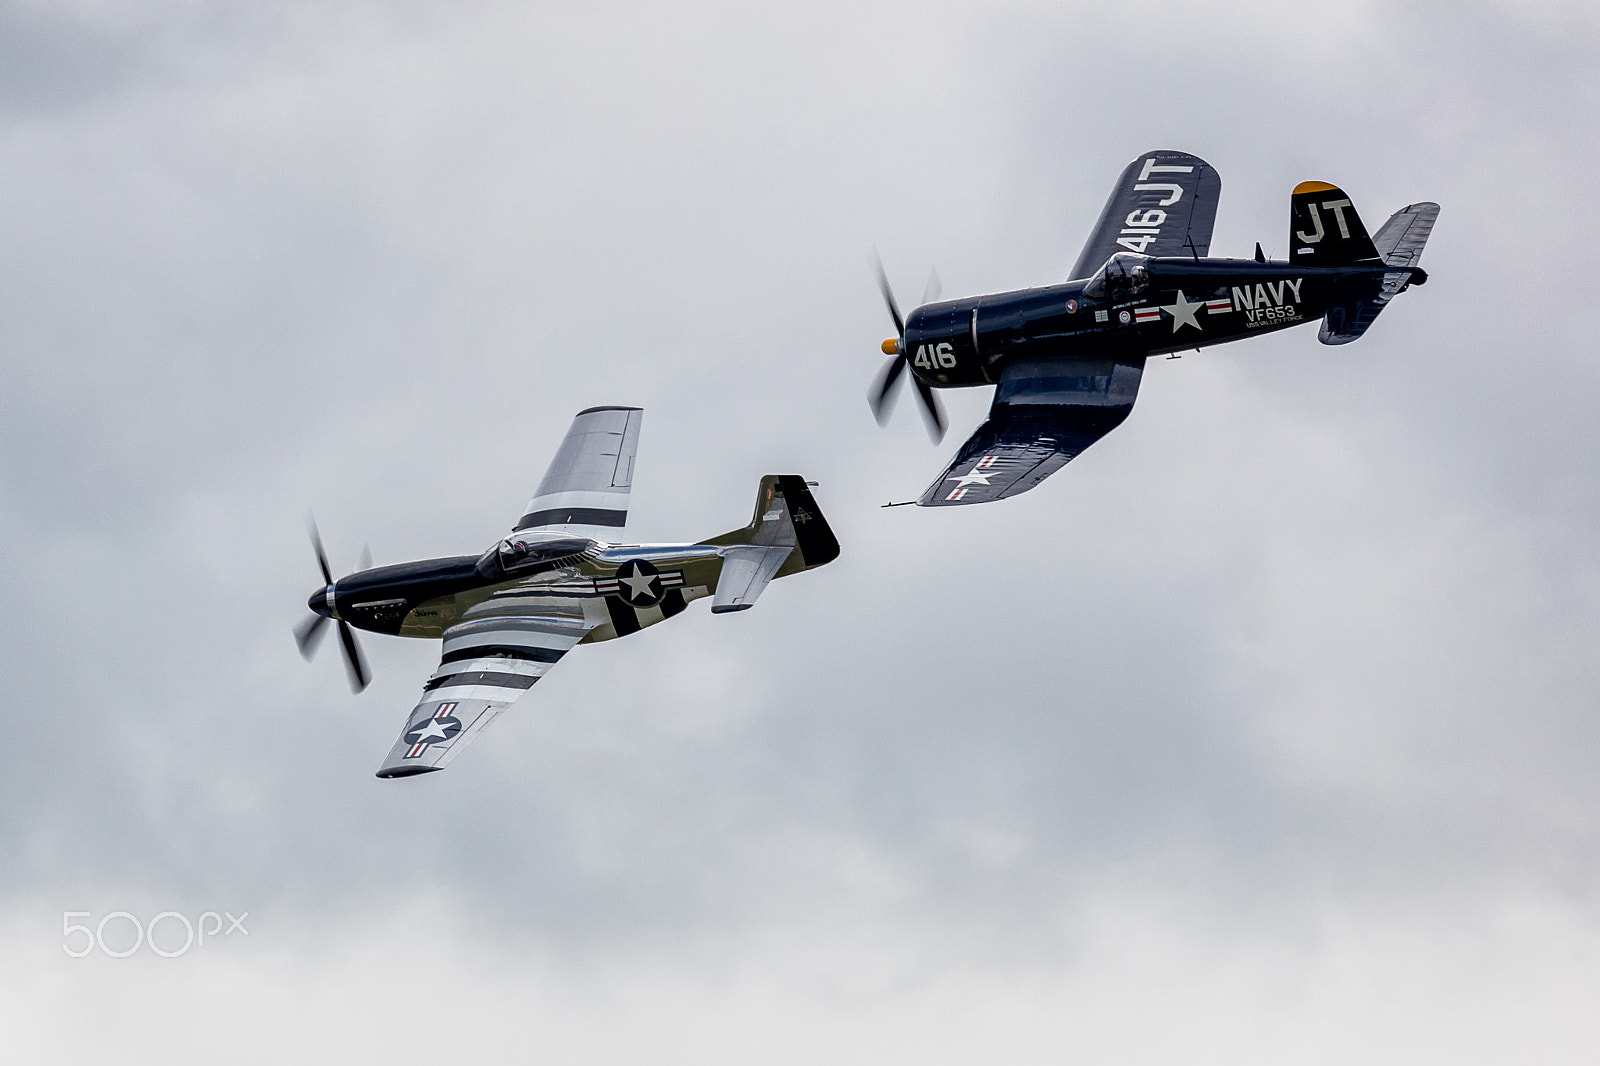 Canon EOS 5DS sample photo. F-4u corsair and p-51 mustang in flight 5 photography